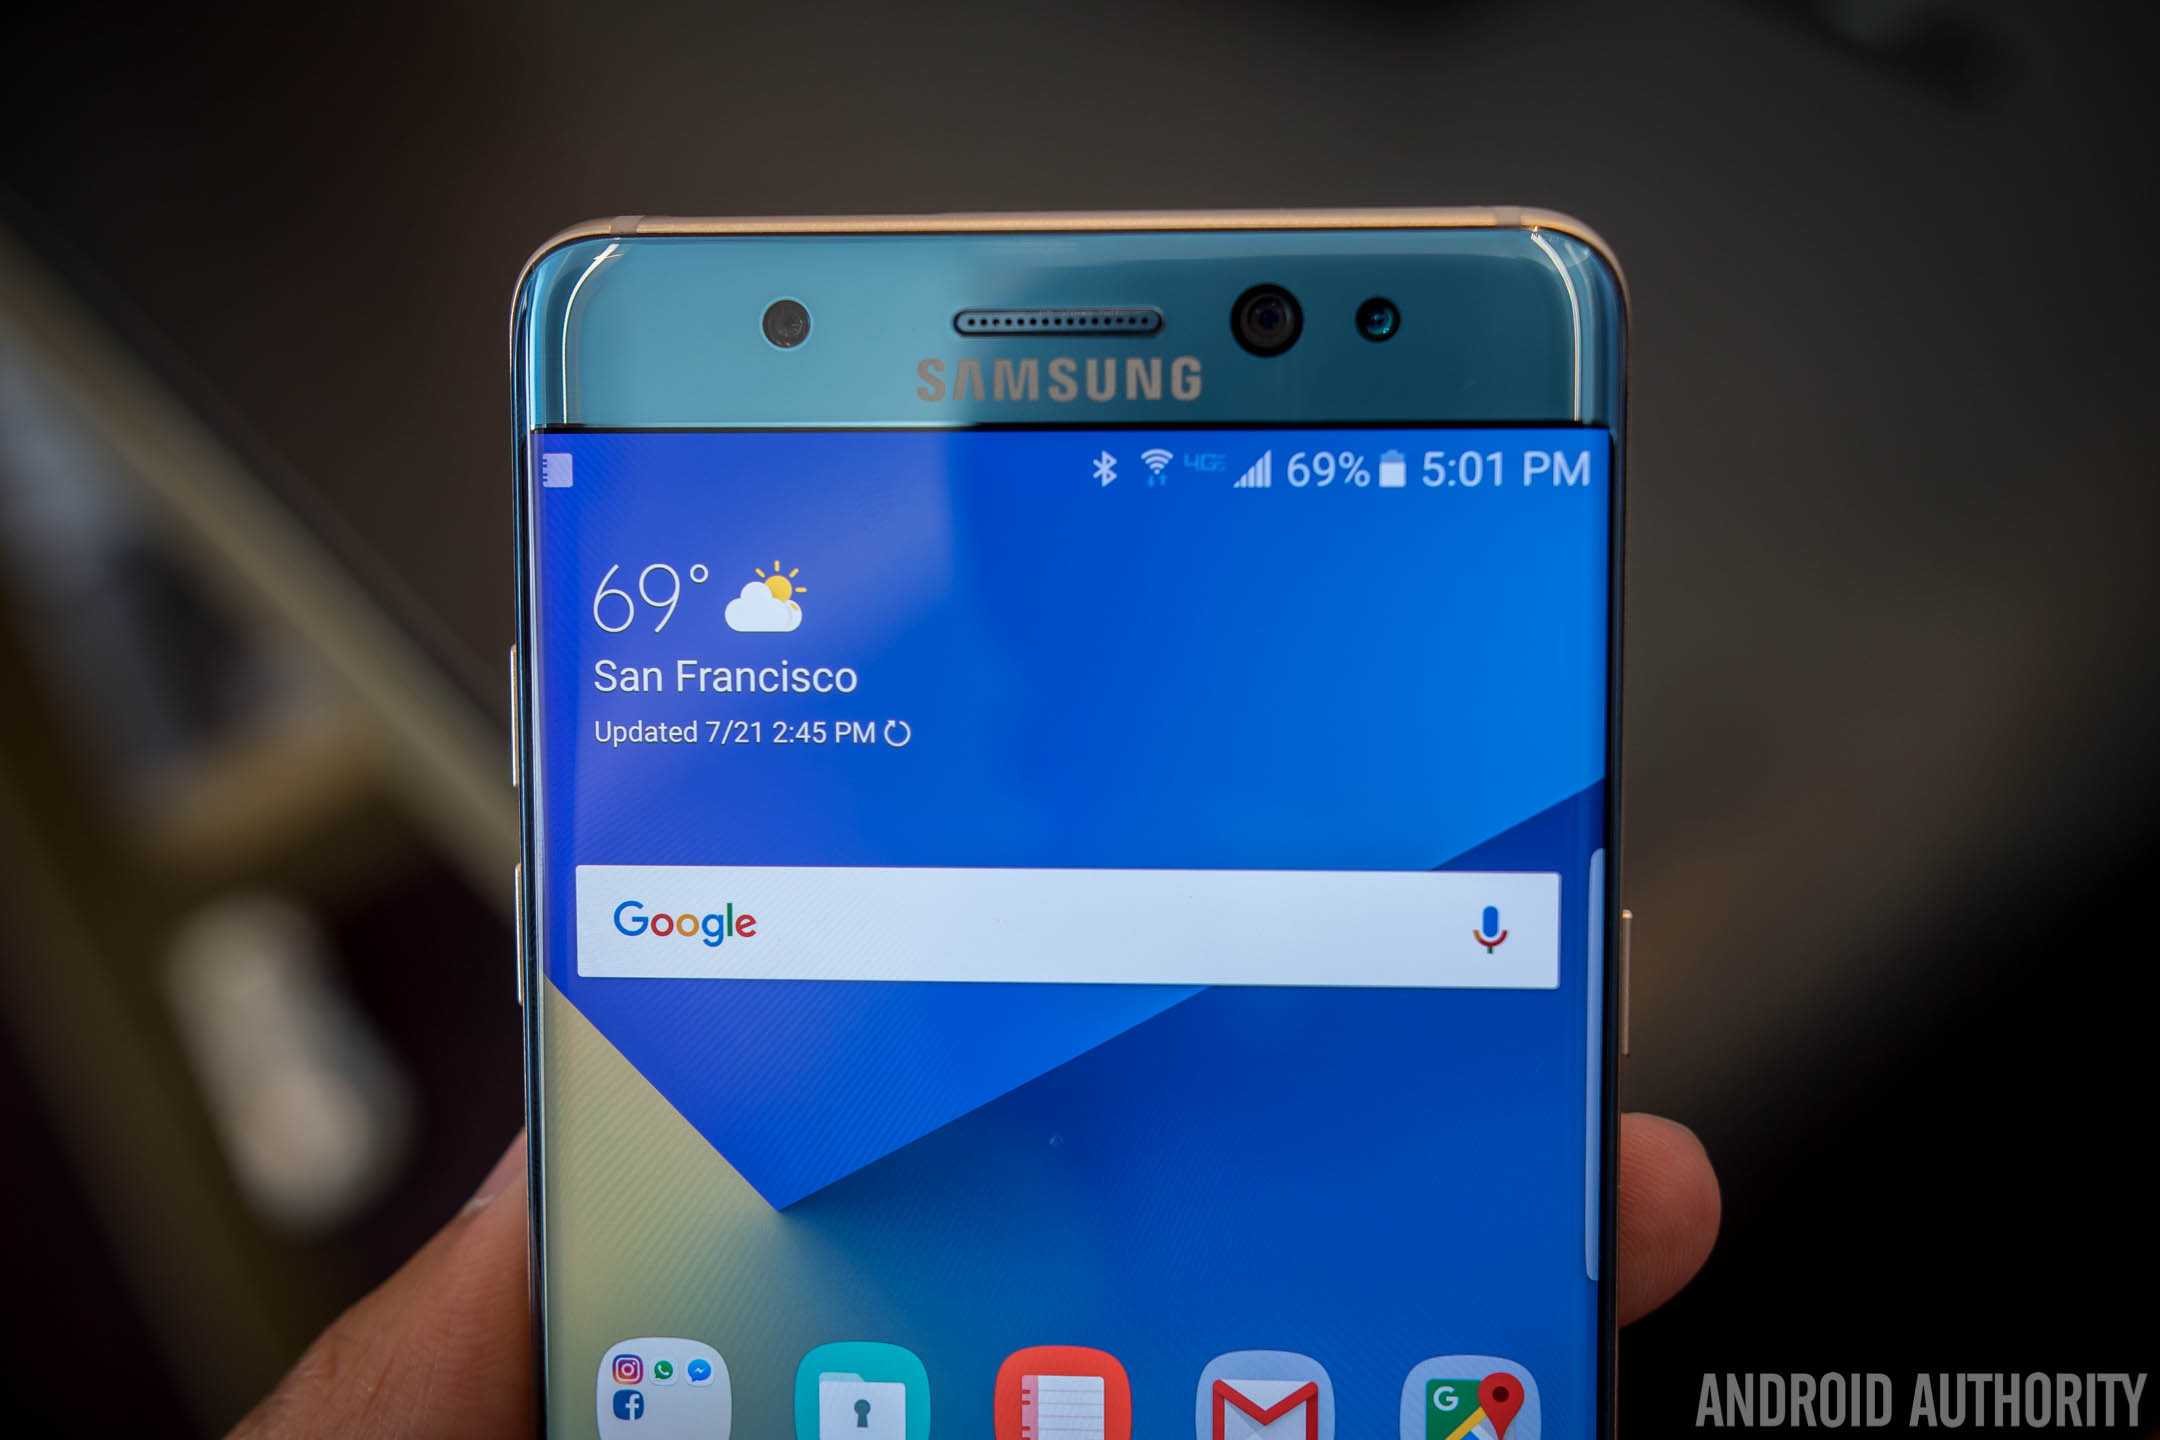 Samsung-Galaxy-Note-7-hands-on-first-batch-AA-(33-of-47)